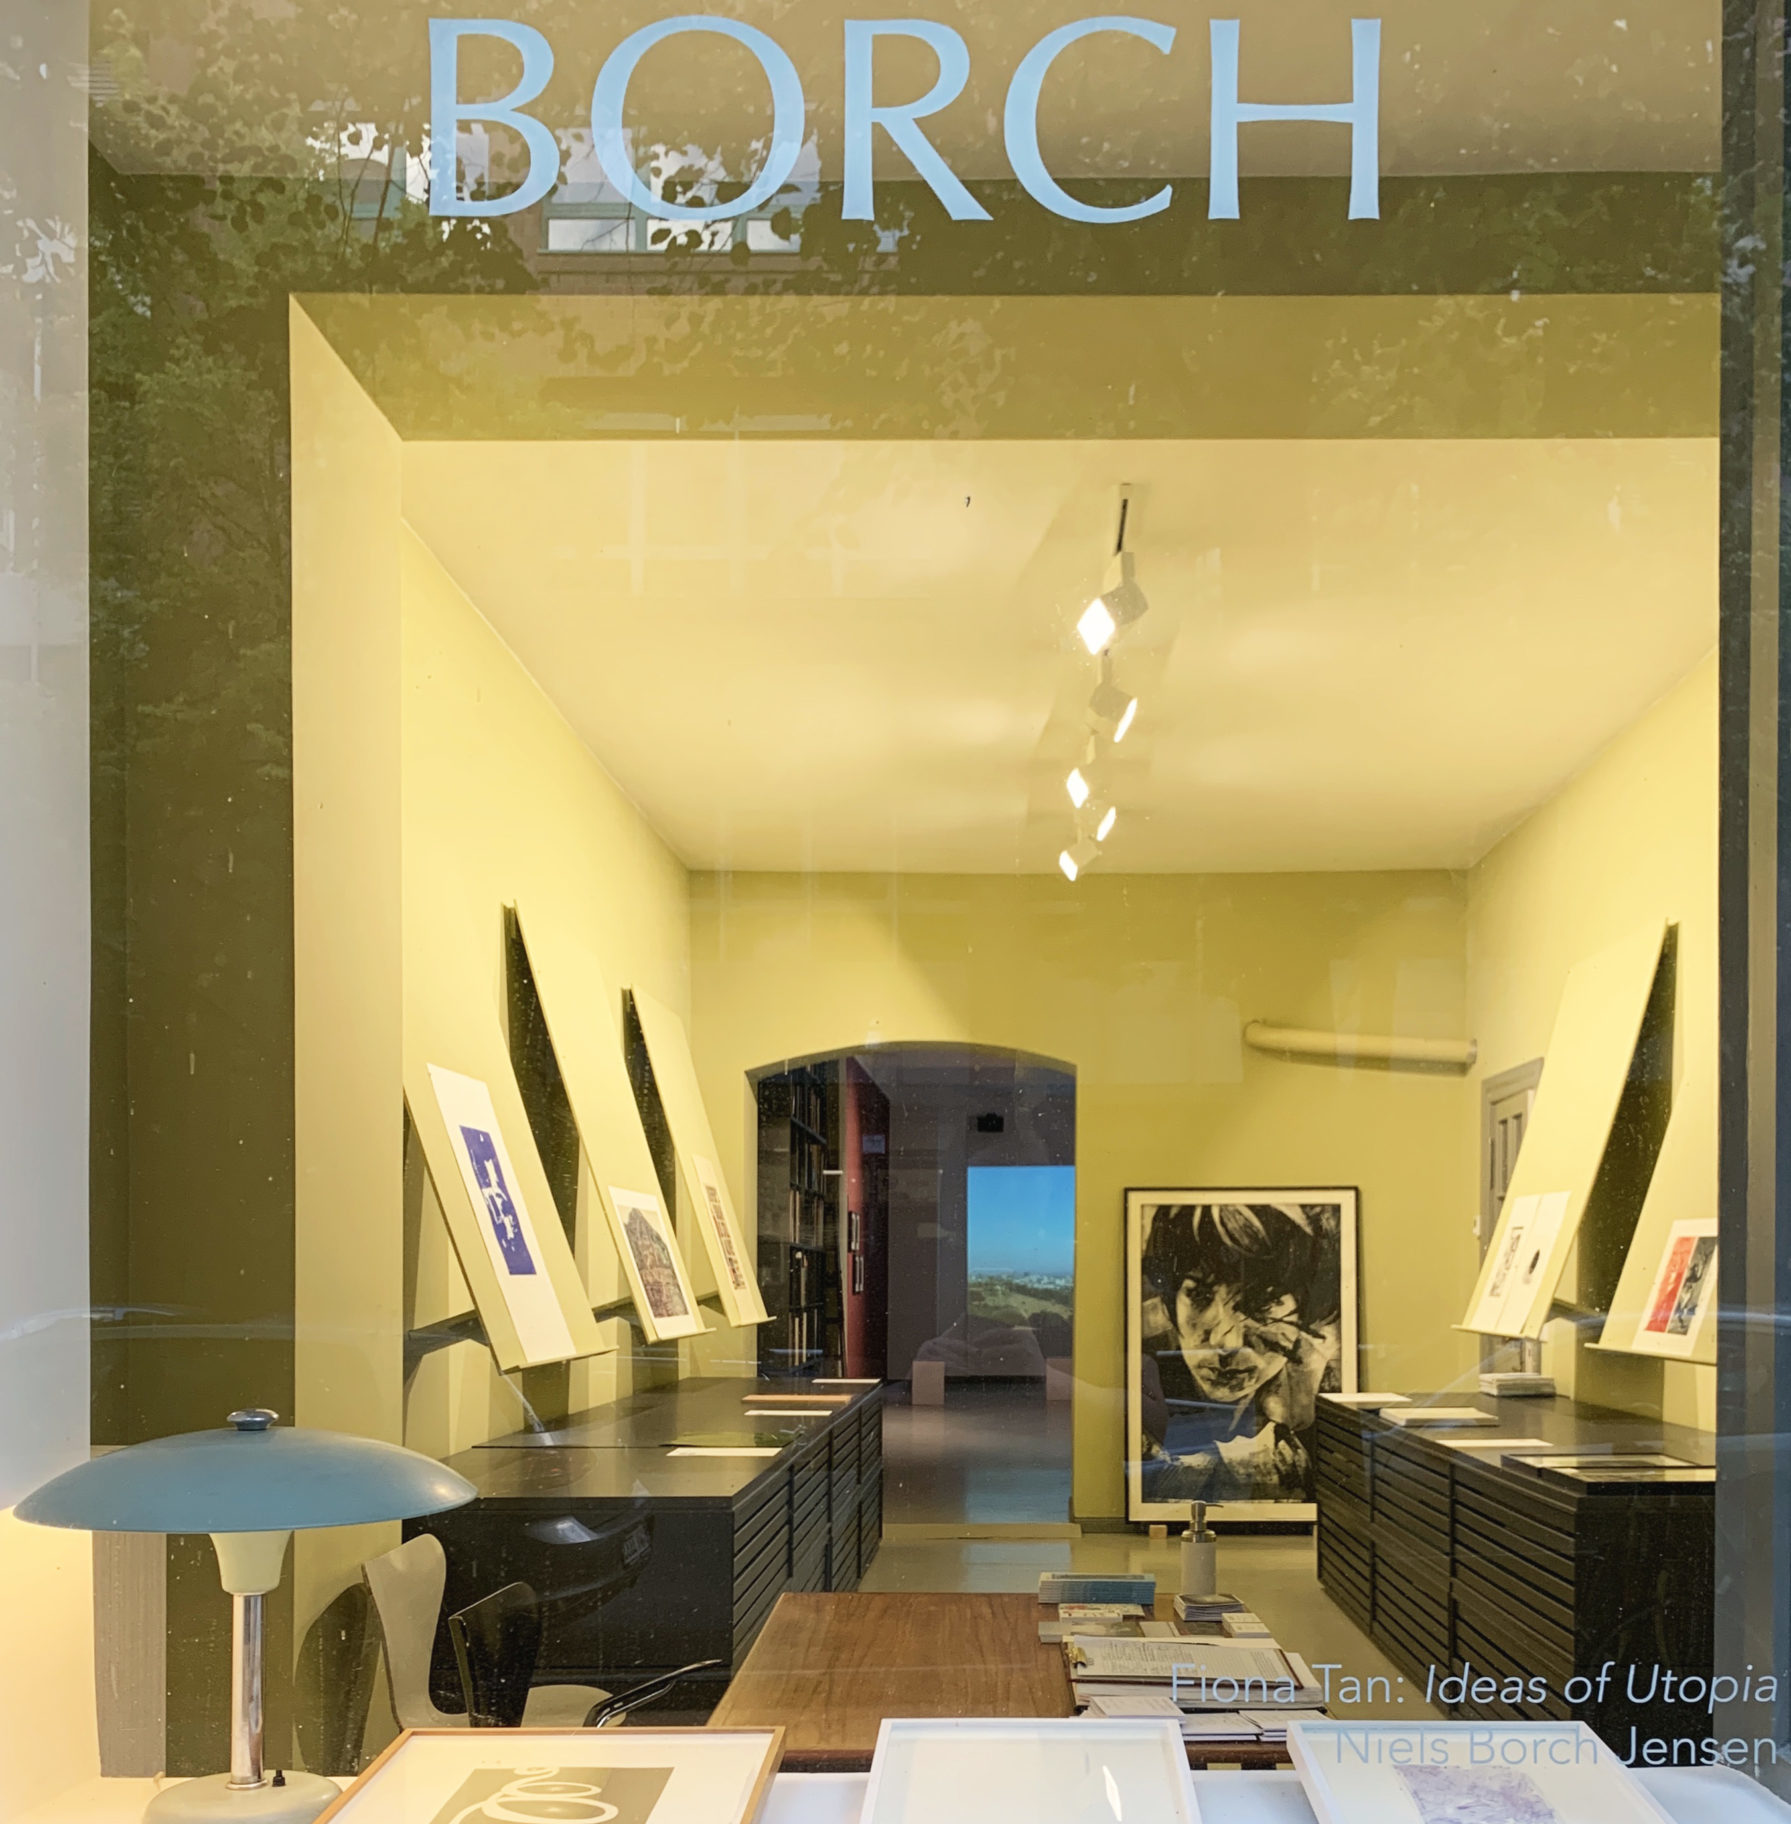 BORCH Gallery is open Tuesday – Saturday